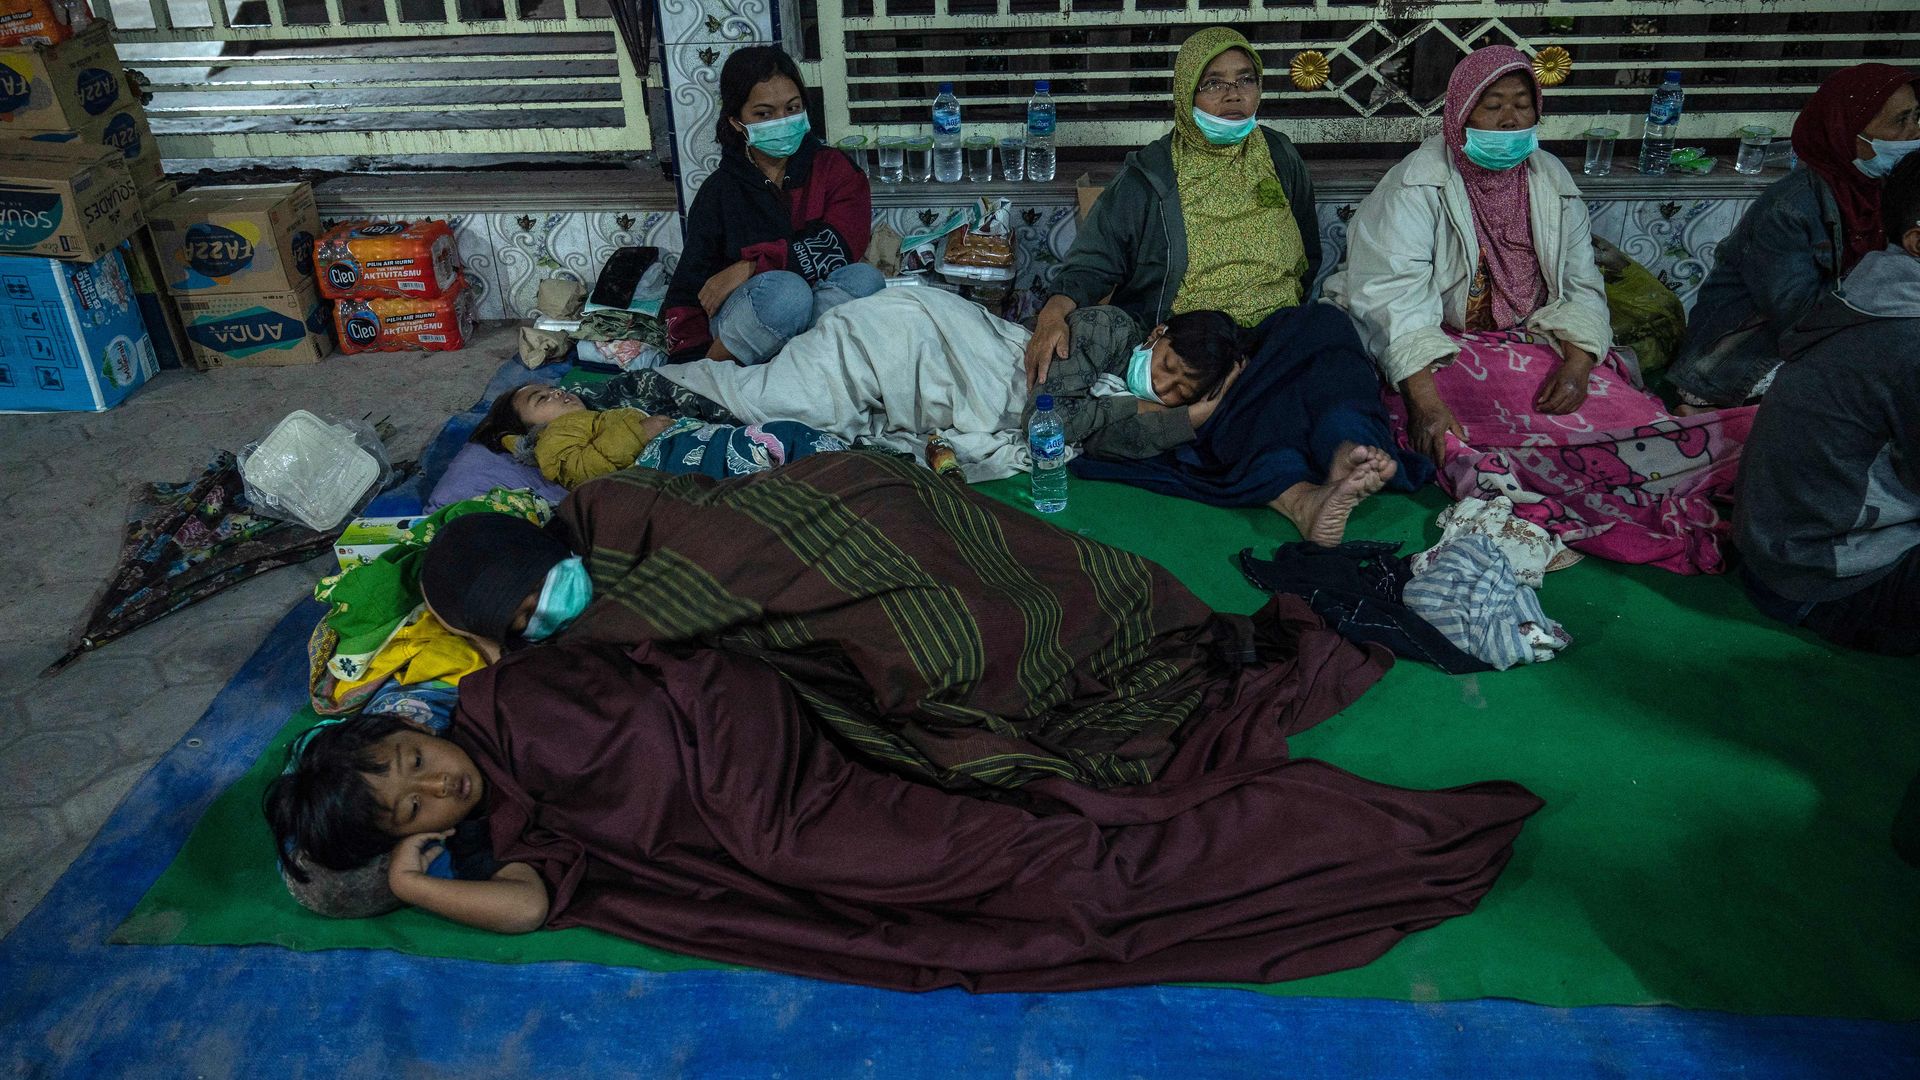 Evacuees take shelter at the local mosque of Sumber Wuluh village, in Lumajang, on December 5, 2021, after the eruption of Semeru volcano.